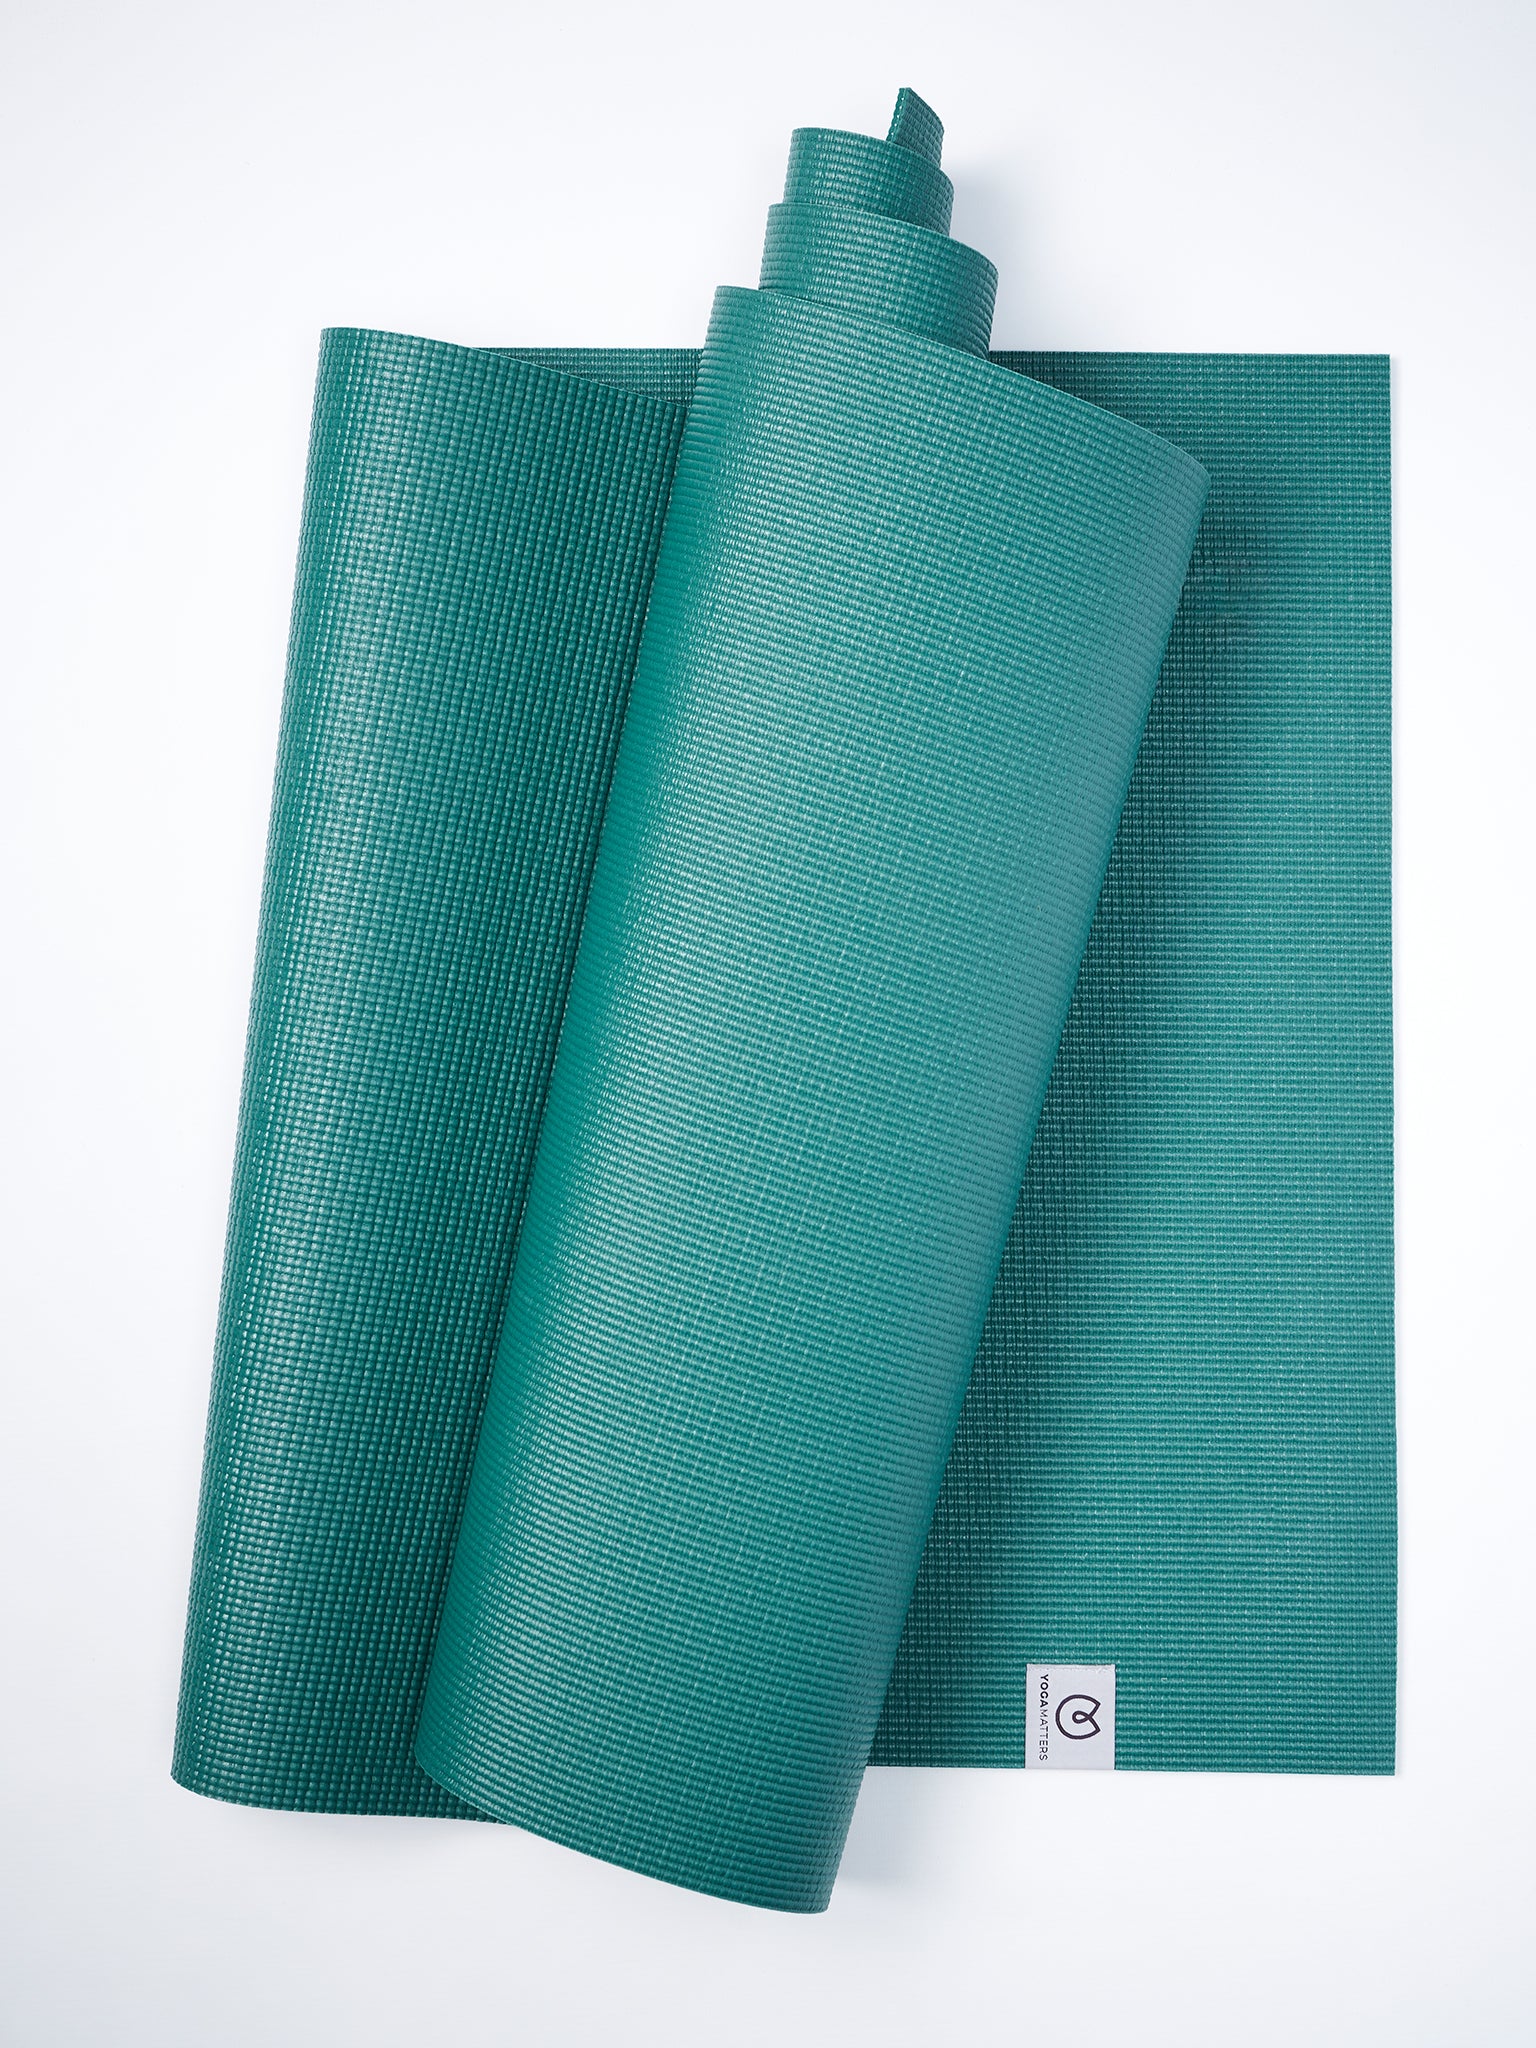 Teal yoga mat partially rolled, textured non-slip surface, top view, brand logo visible, isolated on white background, fitness and wellness accessory.